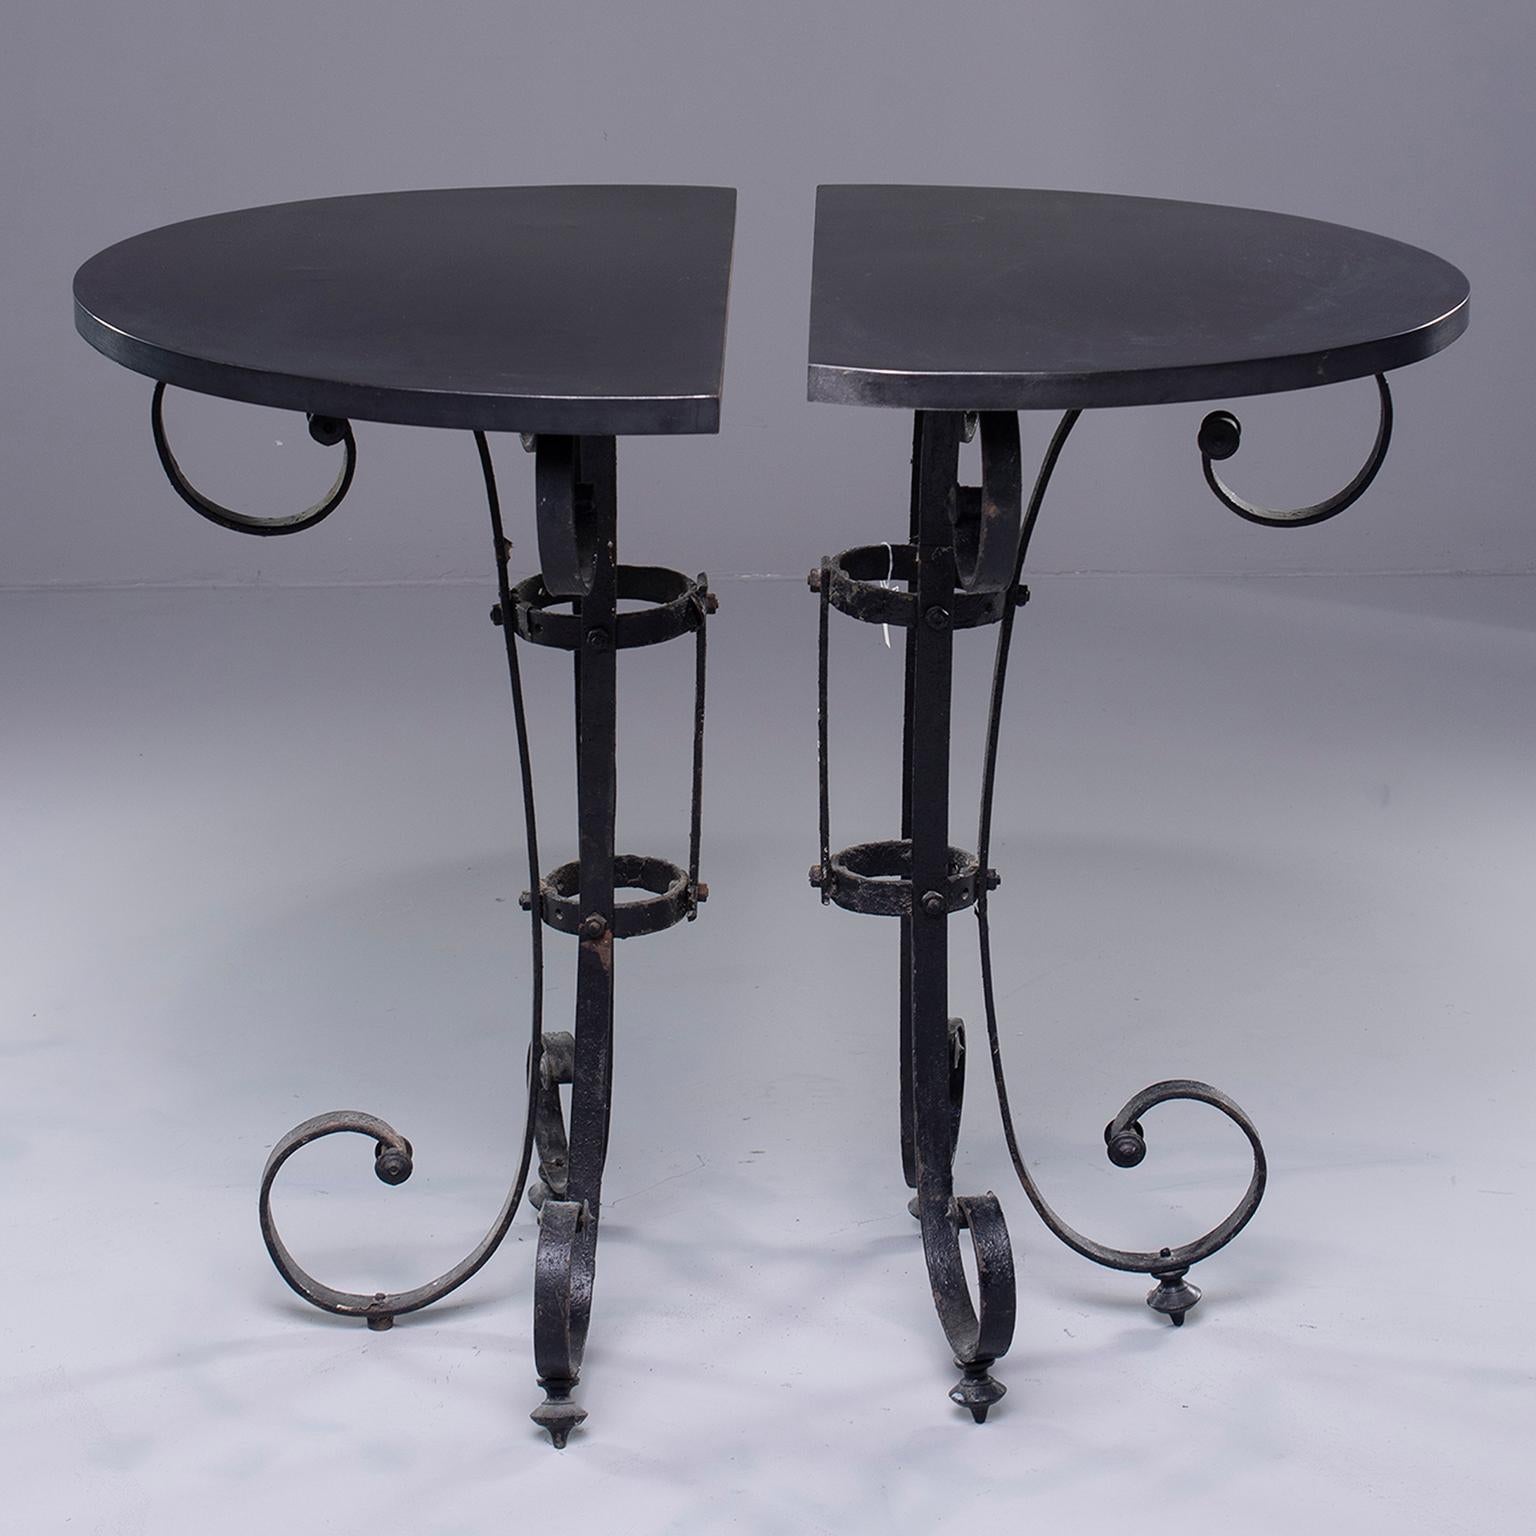 Pair of Demilune Consoles with Italian Iron Candelabra Base and Black Metal Tops (Italienisch)